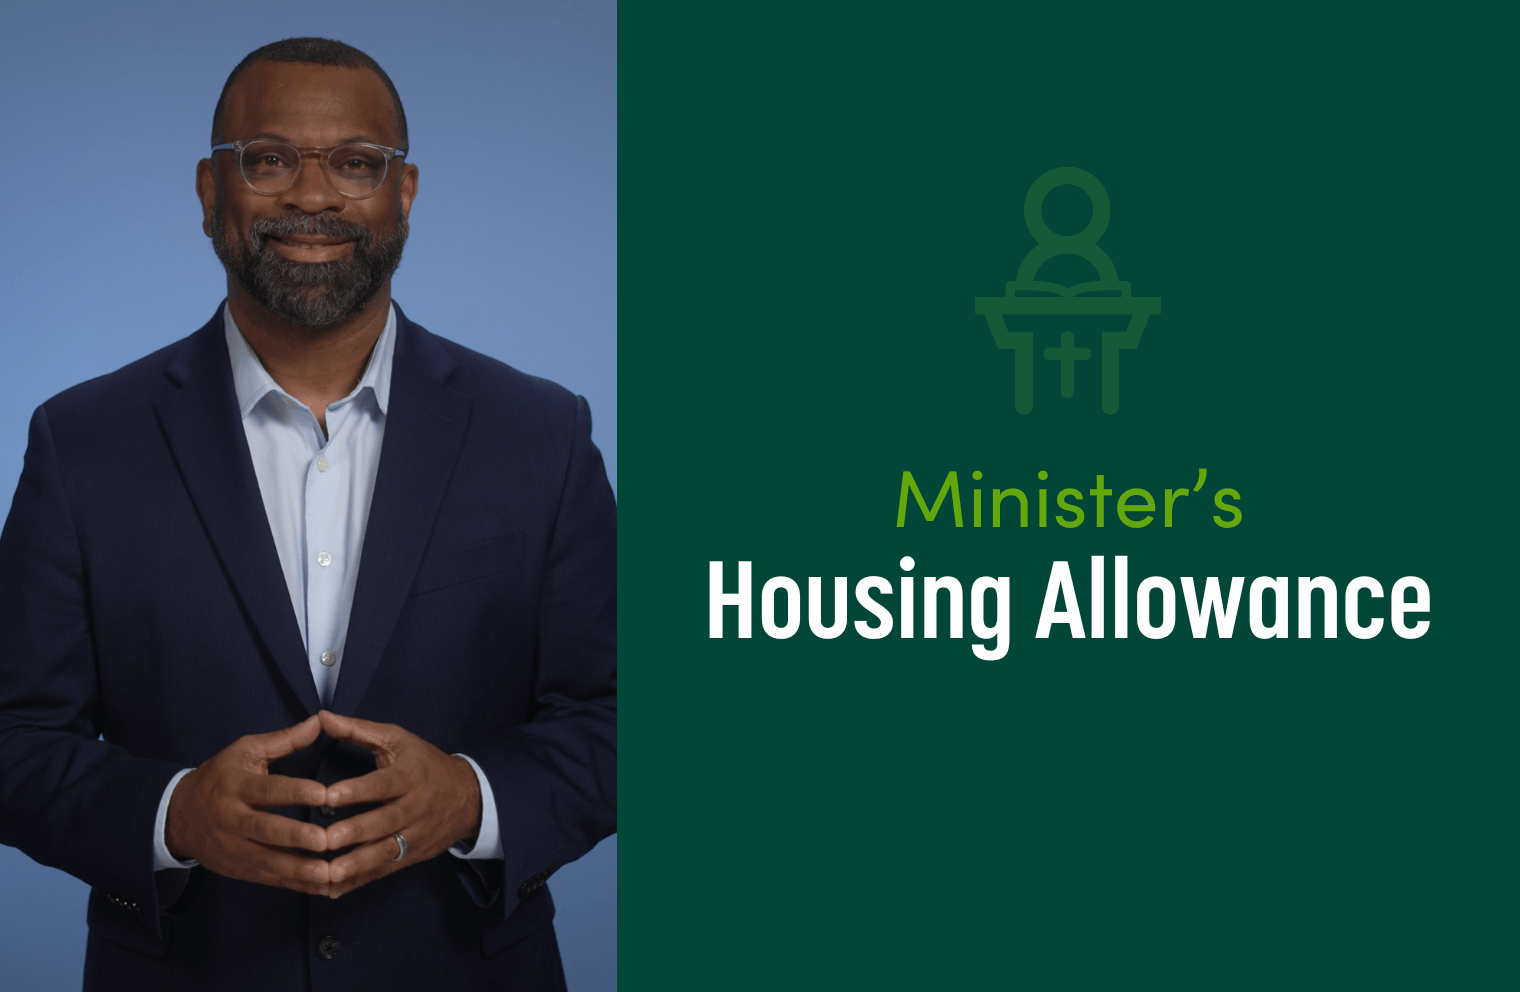 What is Minister's Housing Allowance?